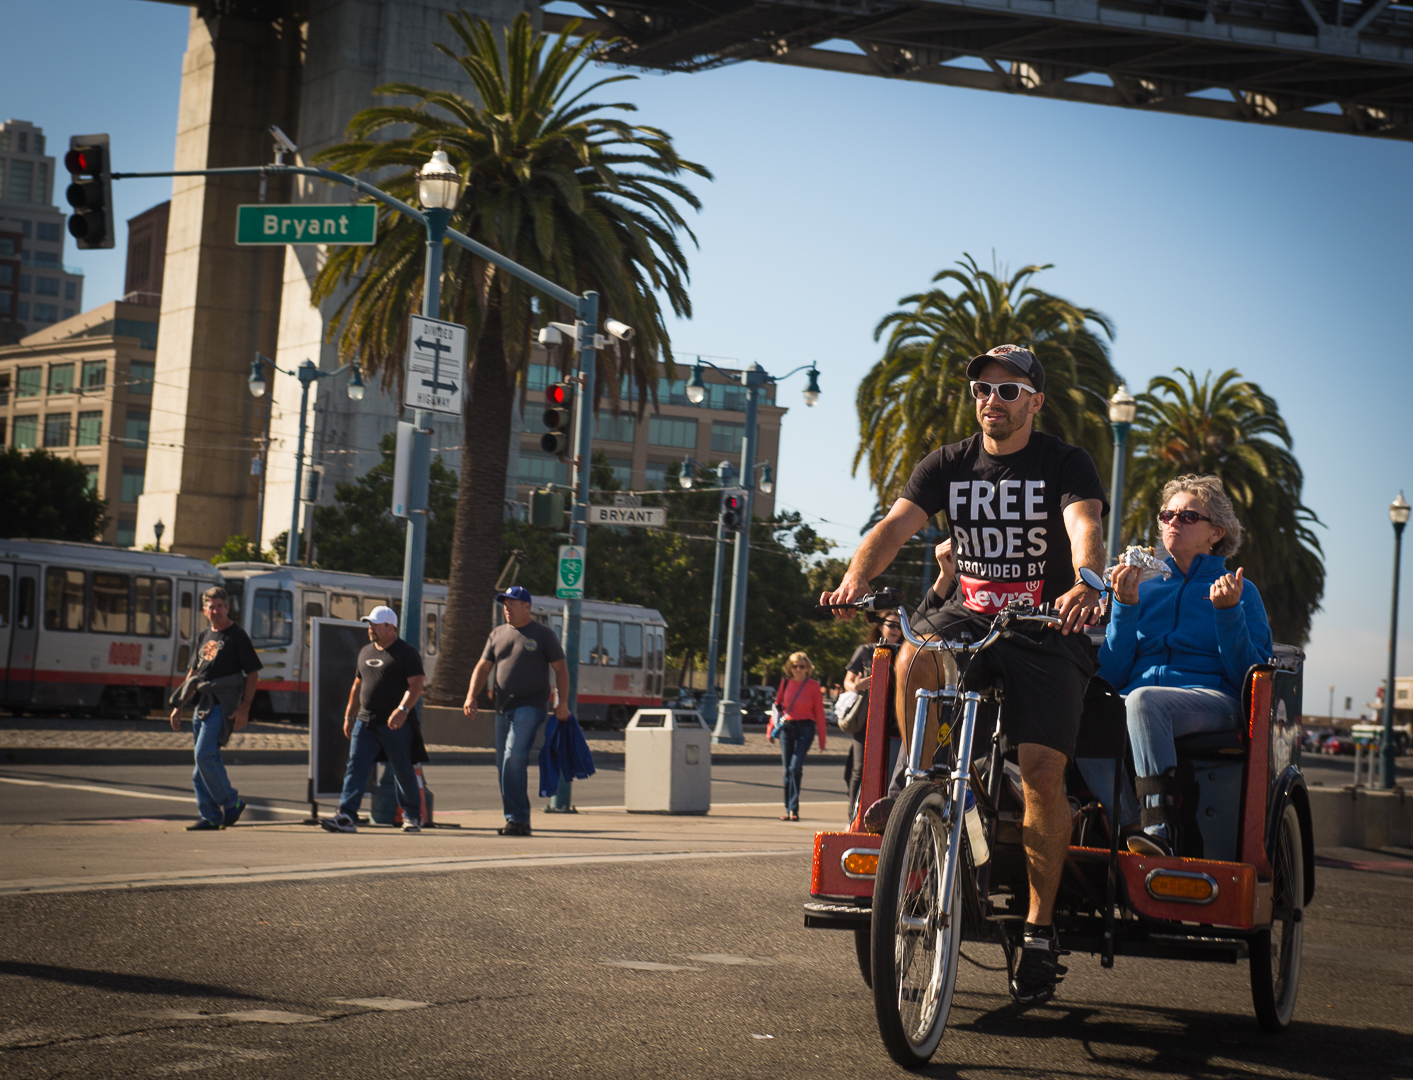 A Pedicab ride to AT&T Park